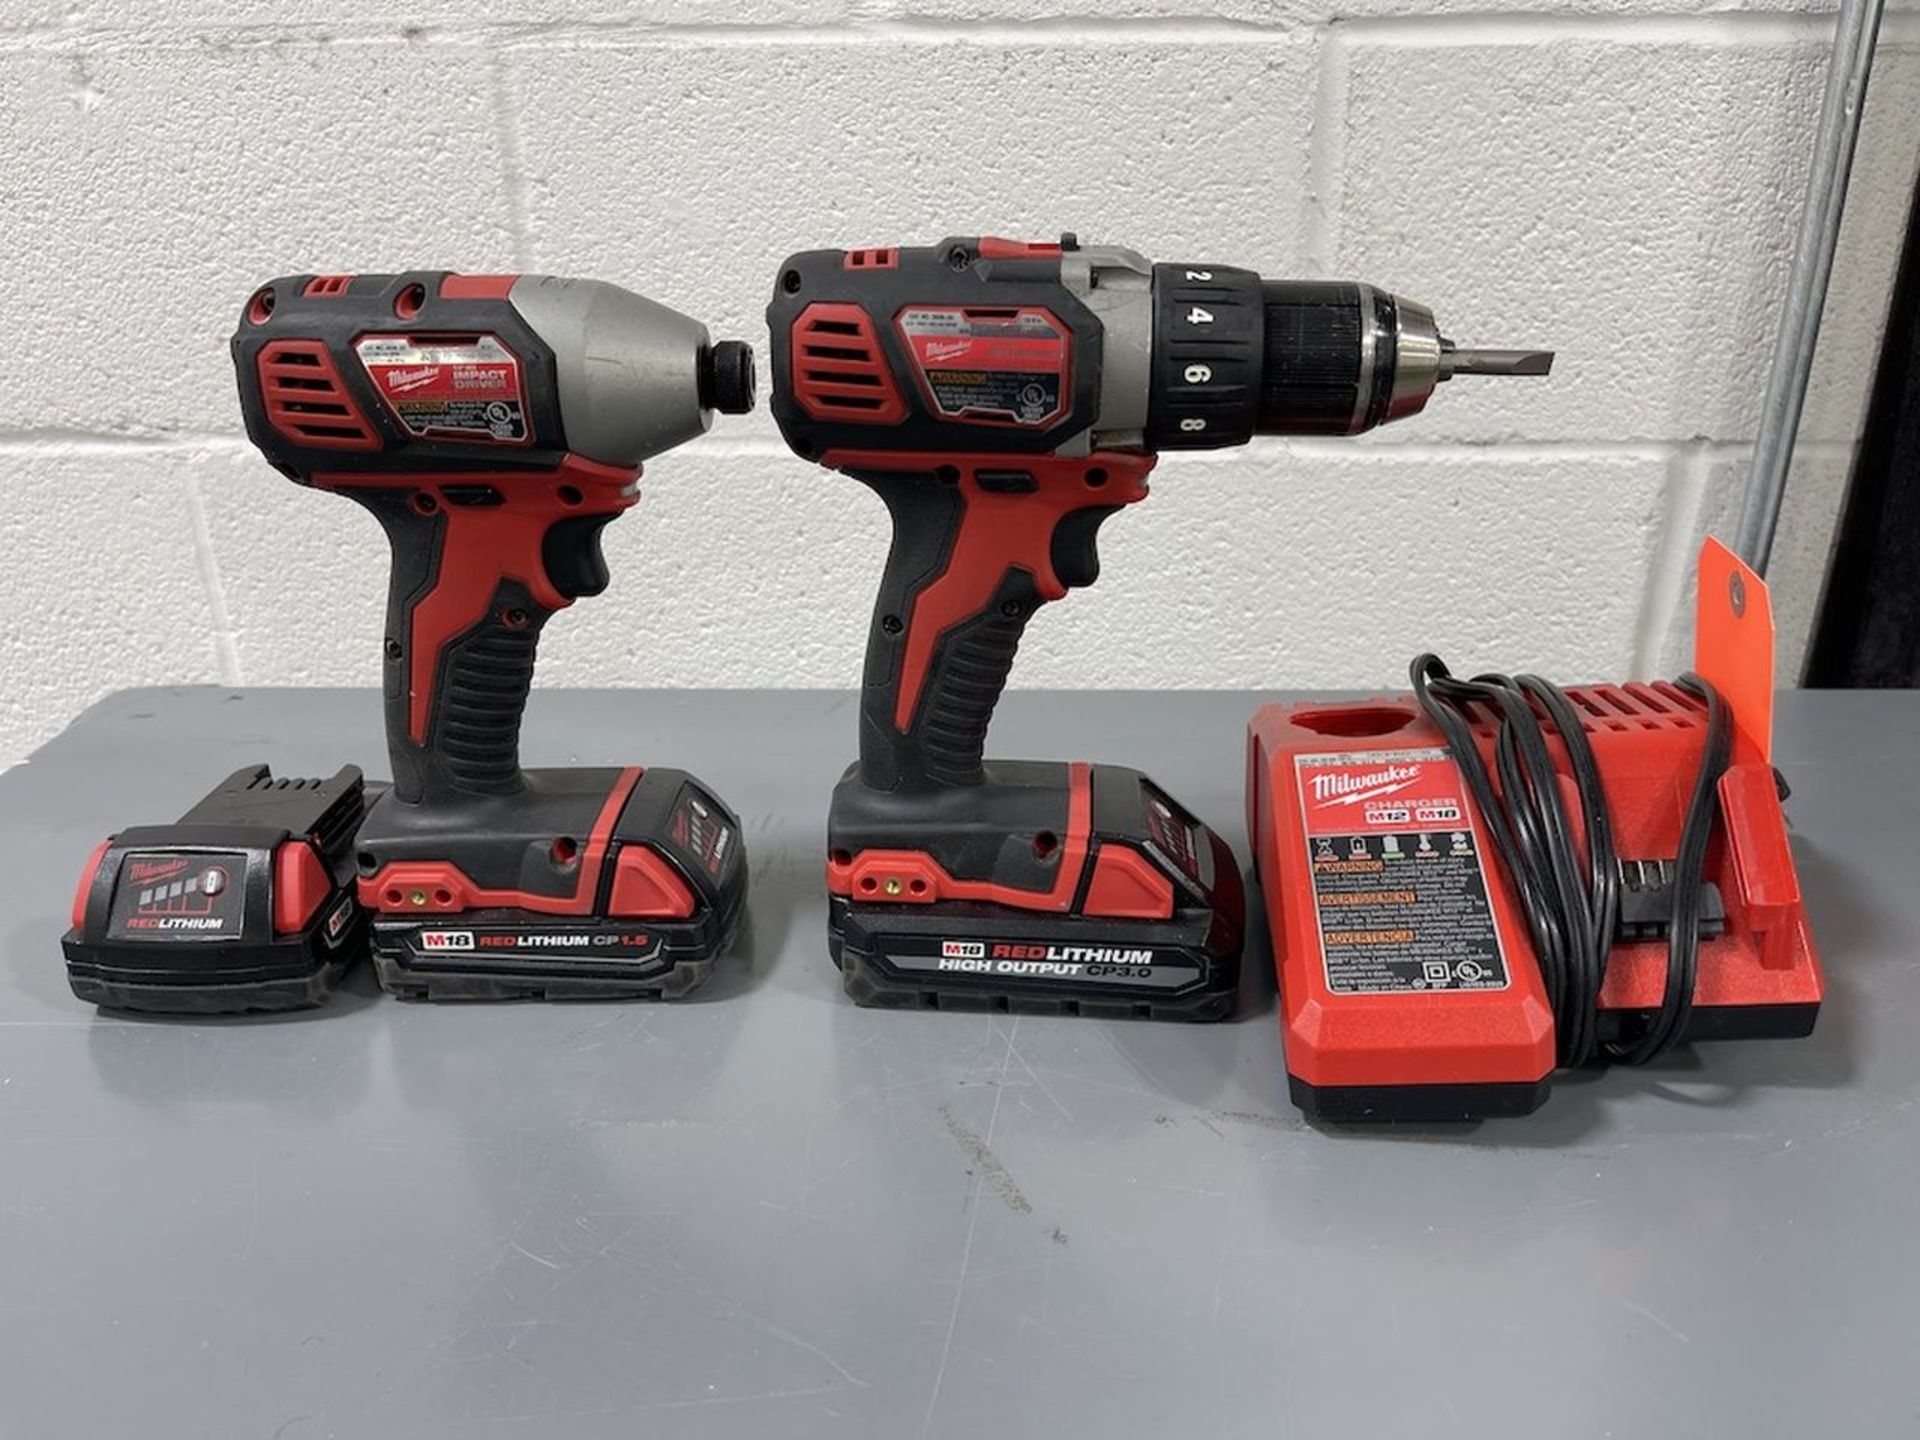 Lot - (1) Milwaukee 1/4 in. 18-V Hex Impact Driver; (1) Milwaukee 1/2 in. 18-V Drill Driver;